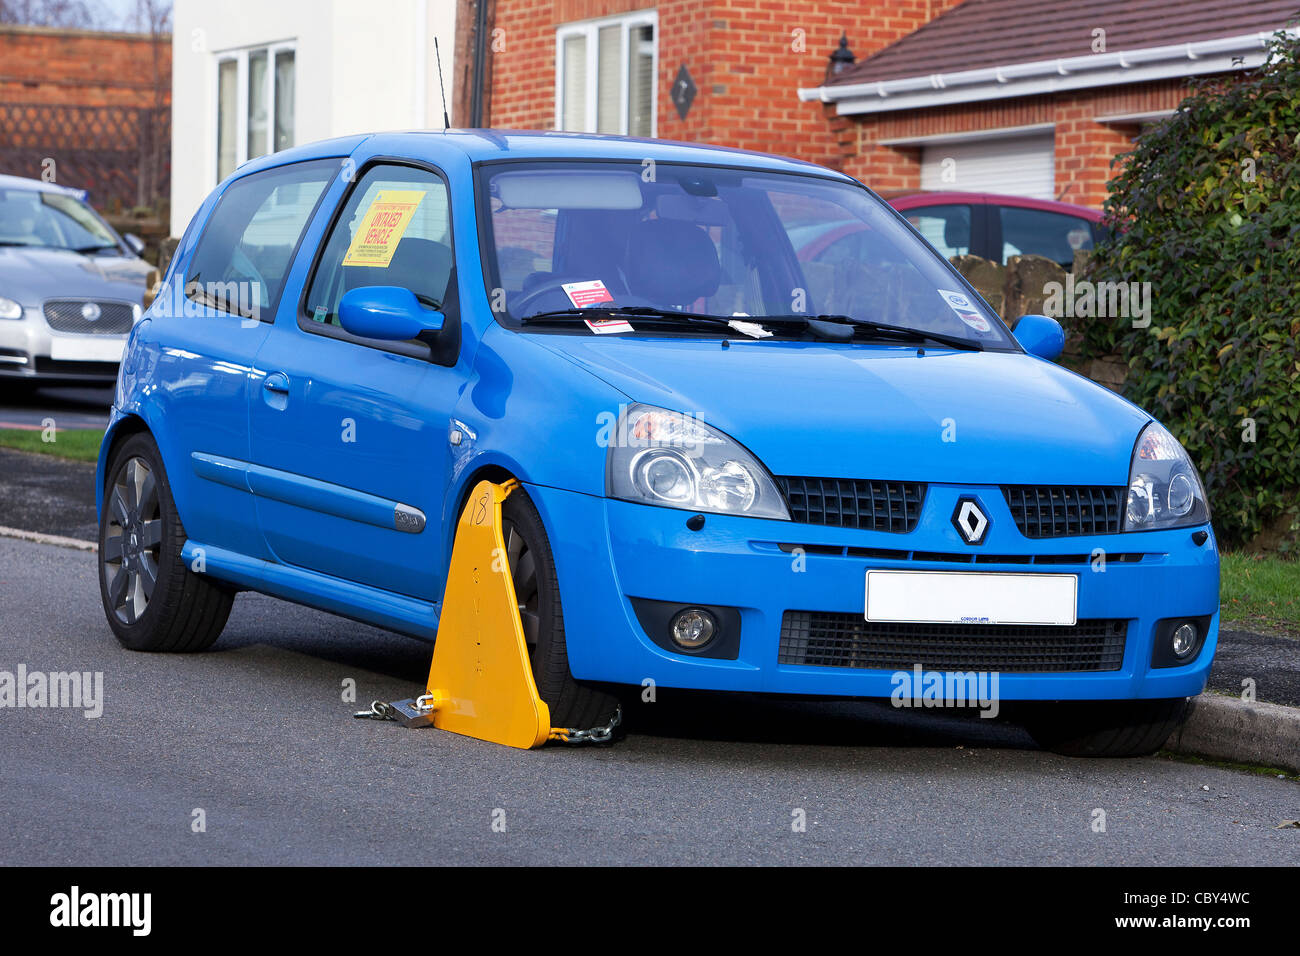 Untaxed vehicle with DVLA wheel clamp on a UK street Stock Photo